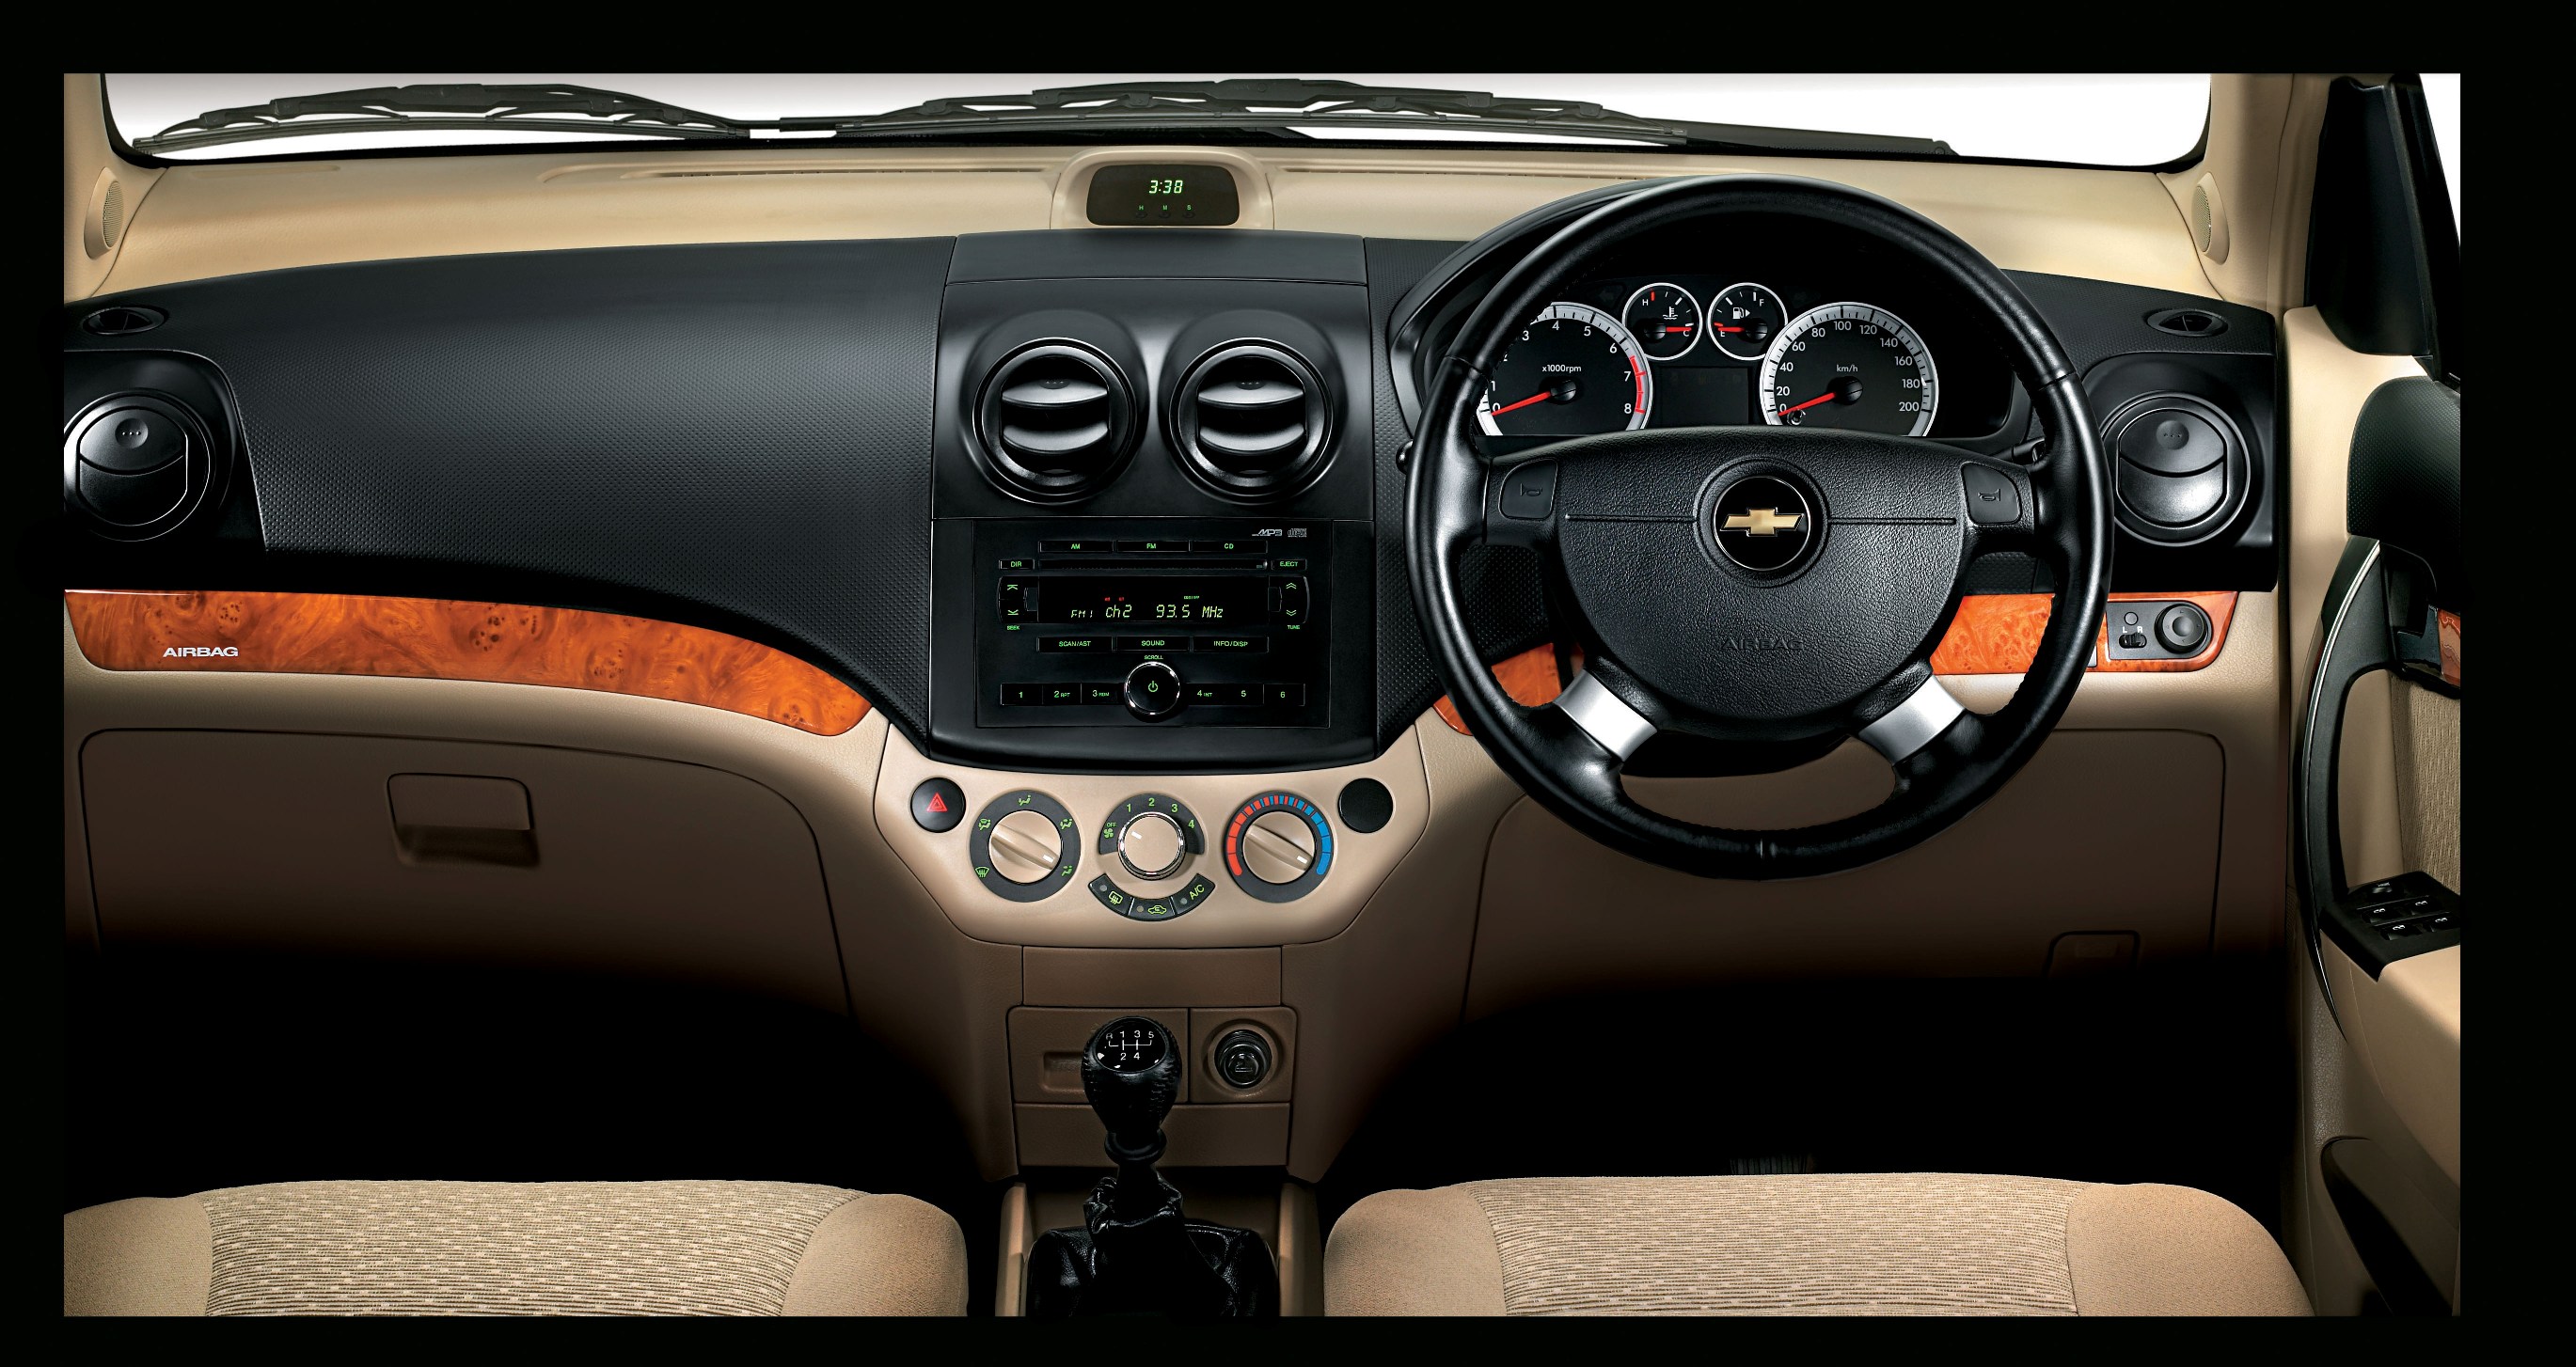 Special Edition Chevrolet Aveo With Airbag Leather